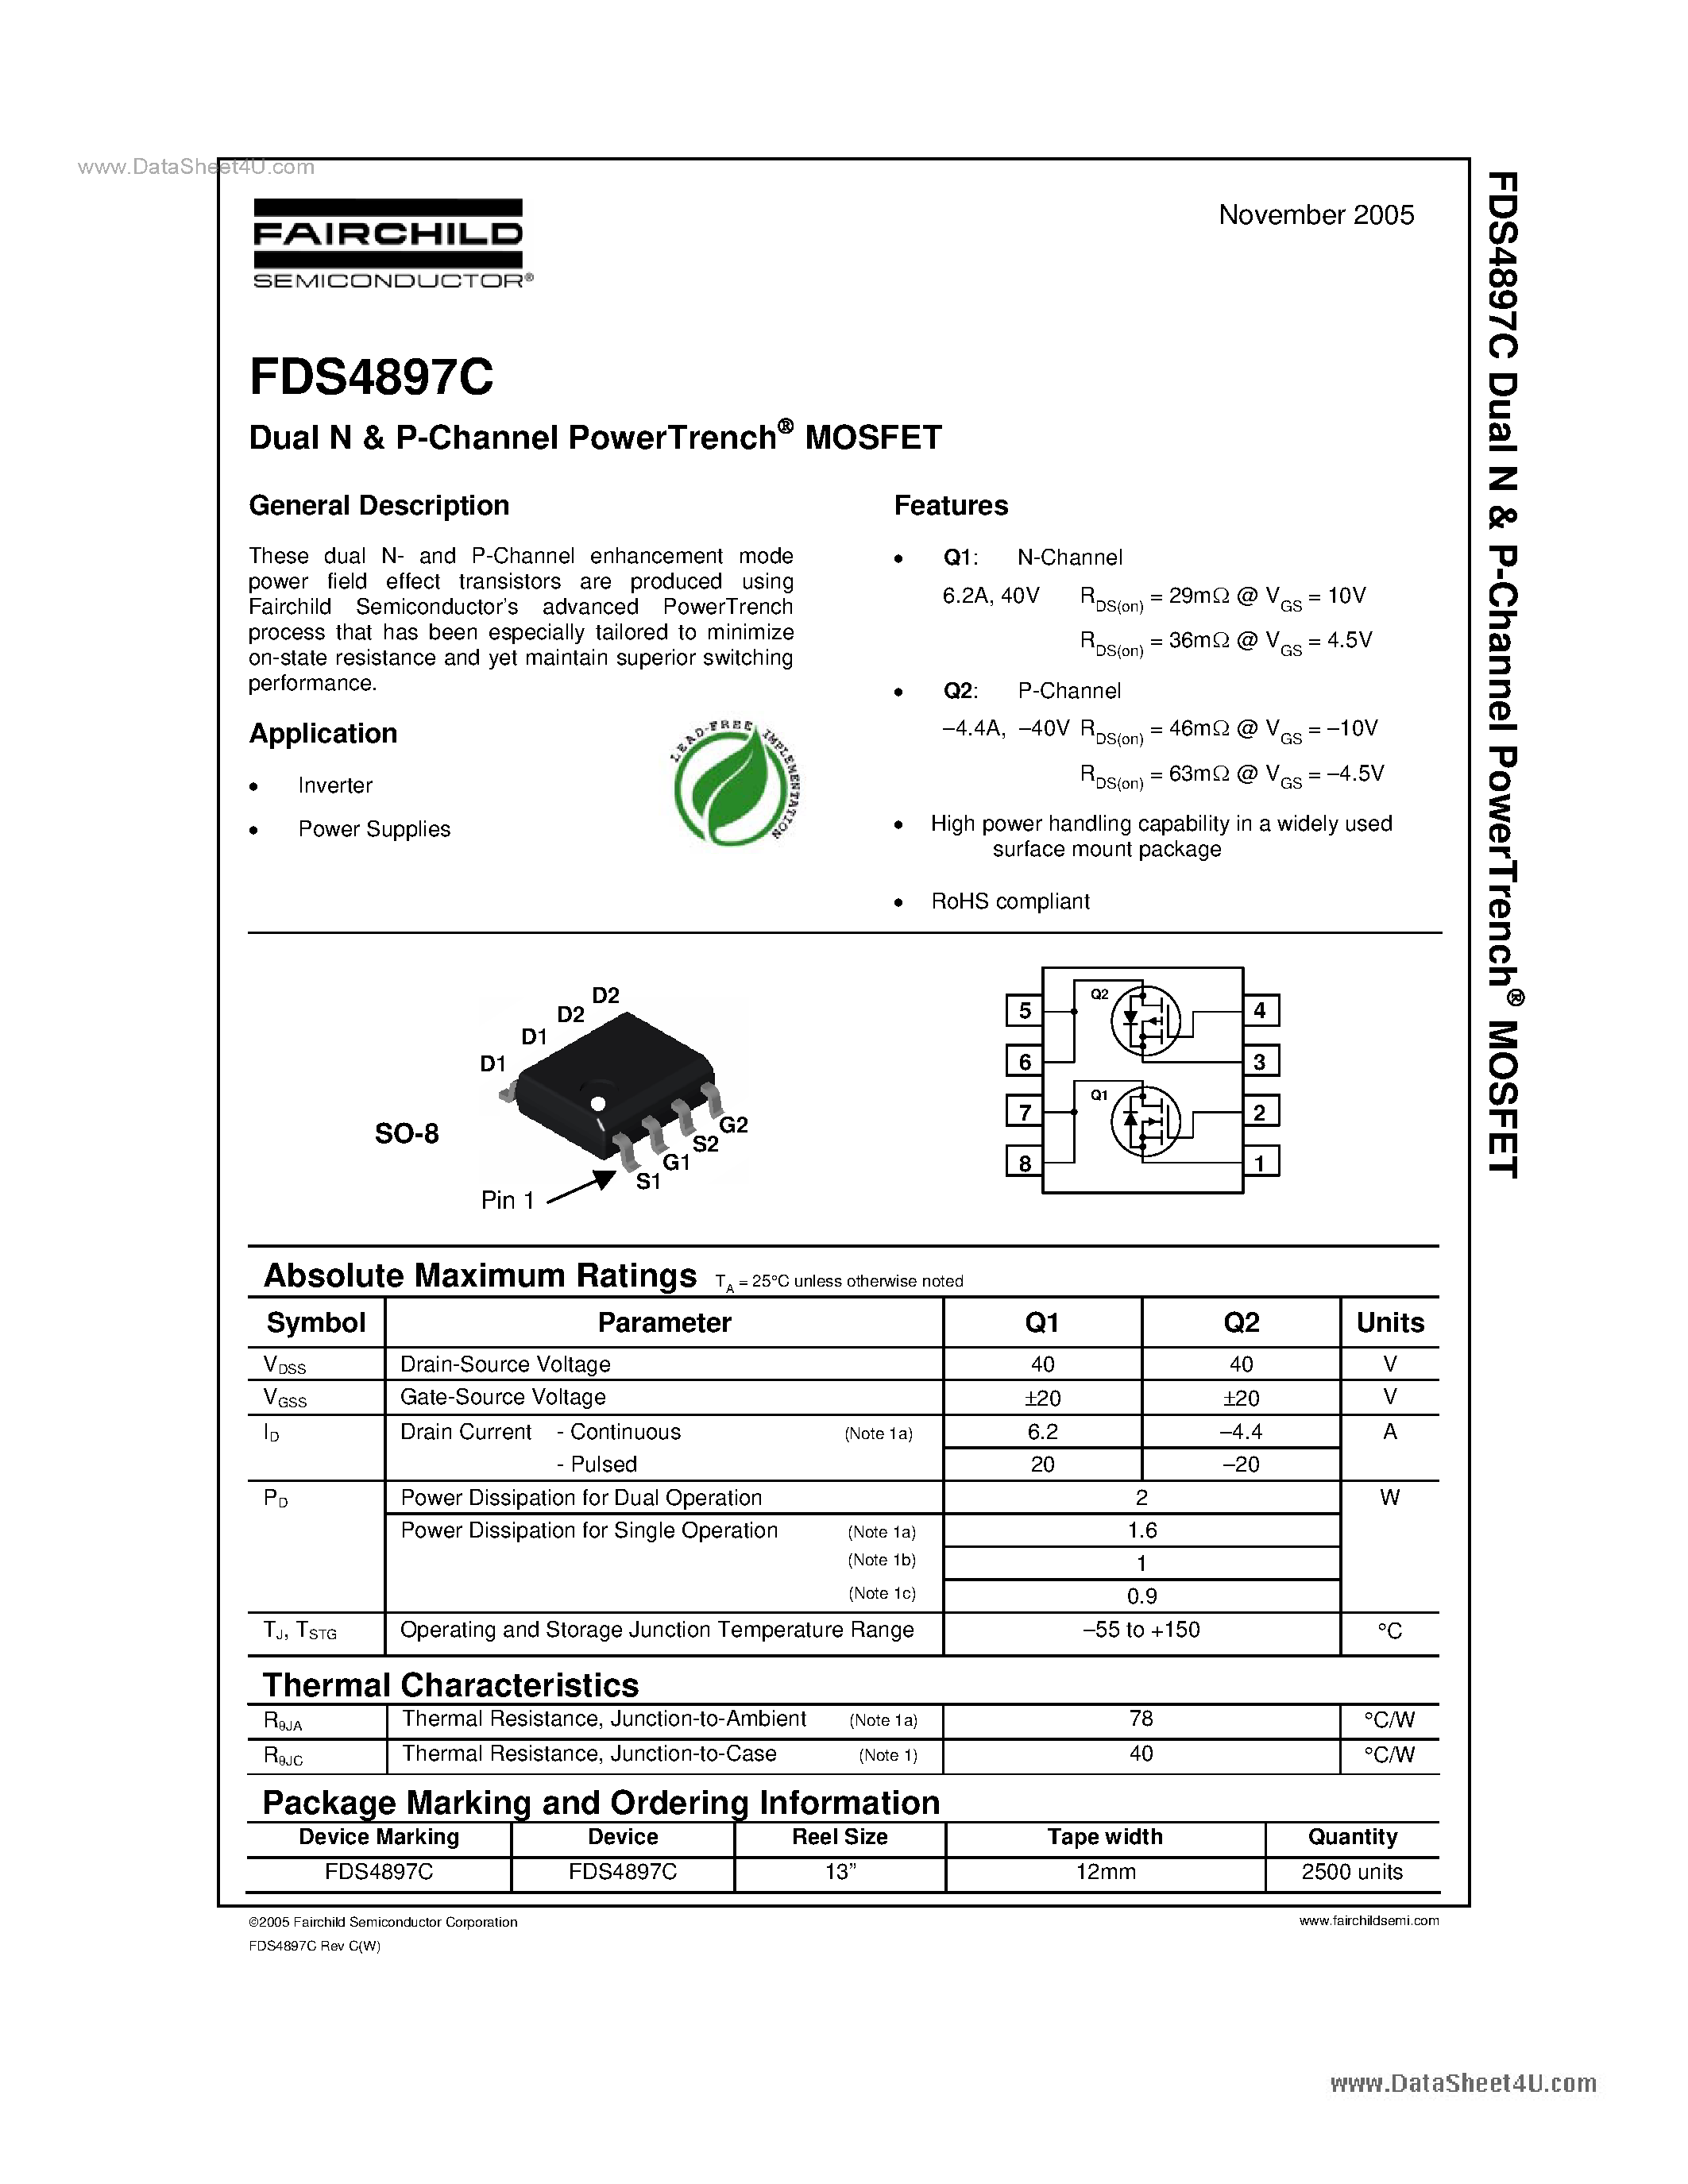 Datasheet FDS4897C - Dual N & P-Channel PowerTrench MOSFET page 1